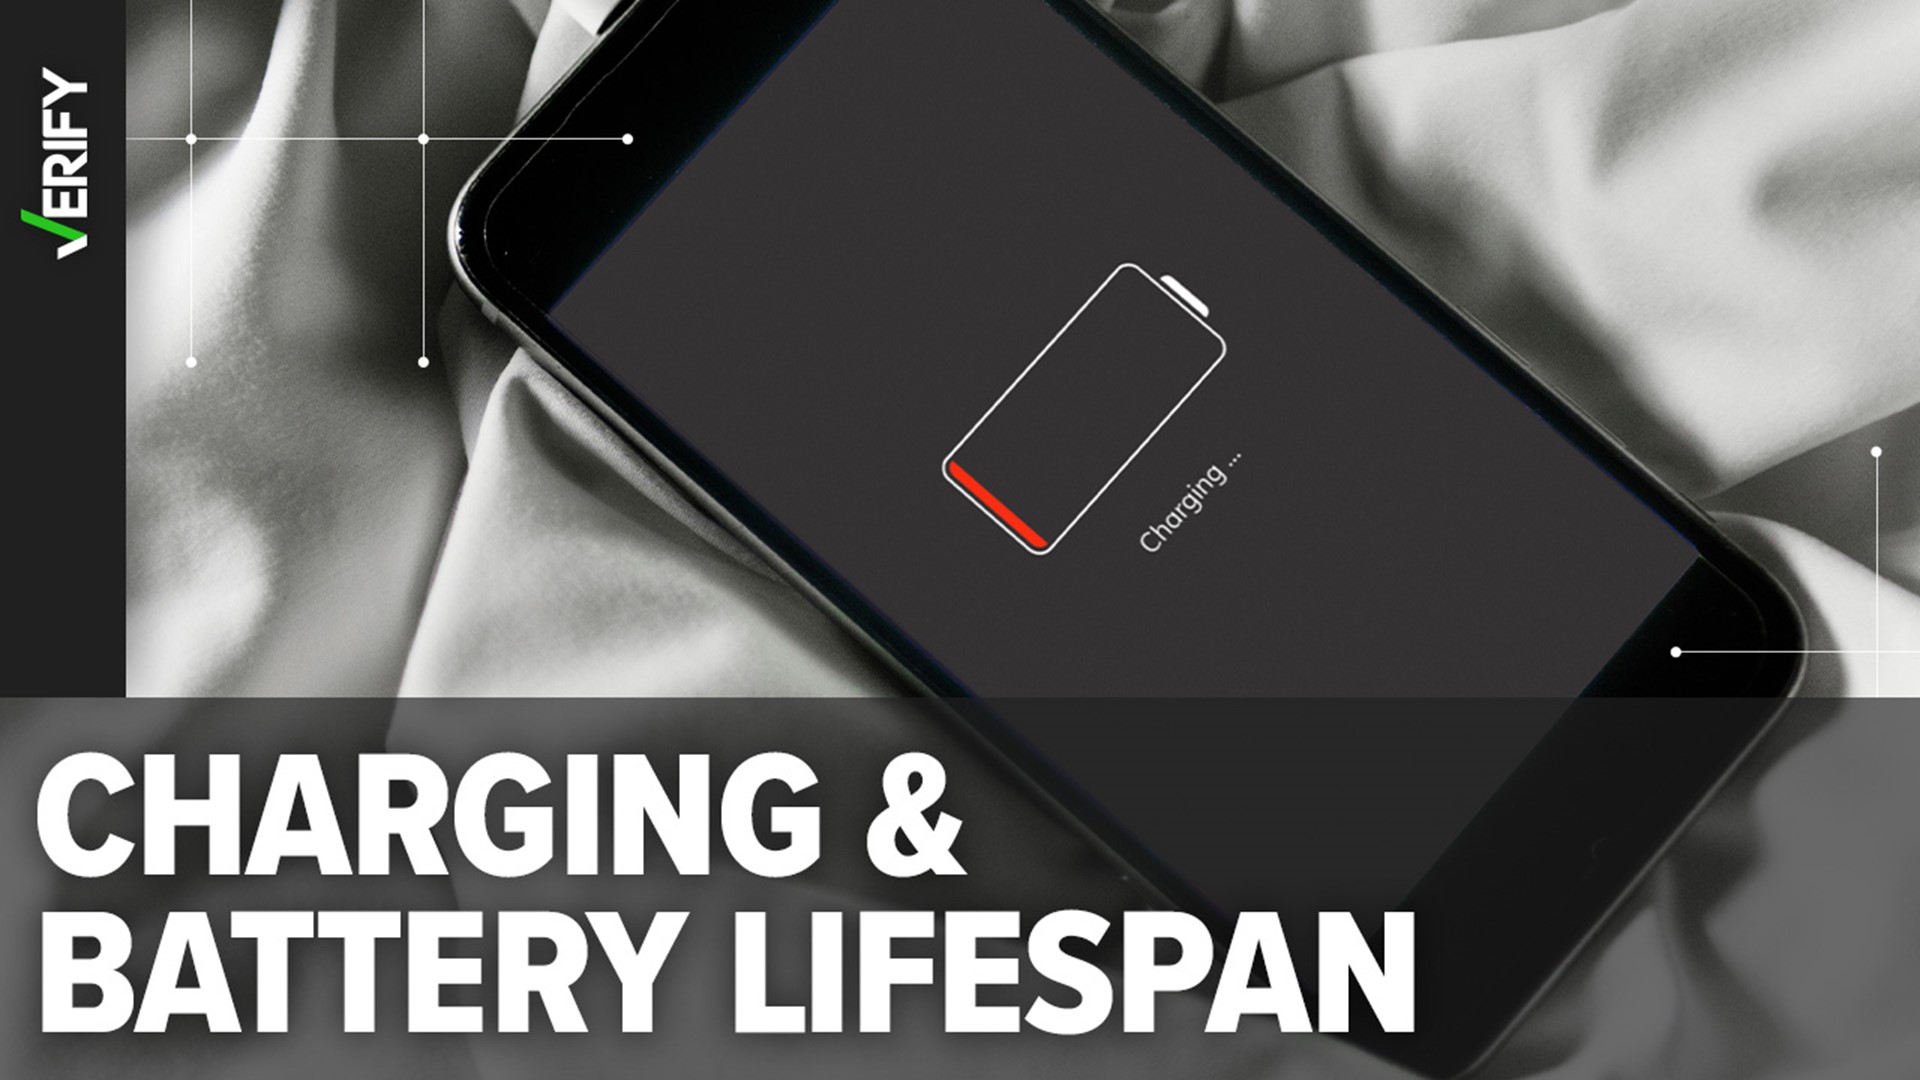 Modern phones use lithium-ion batteries, which are actually worse off when you wait until 0% to recharge.